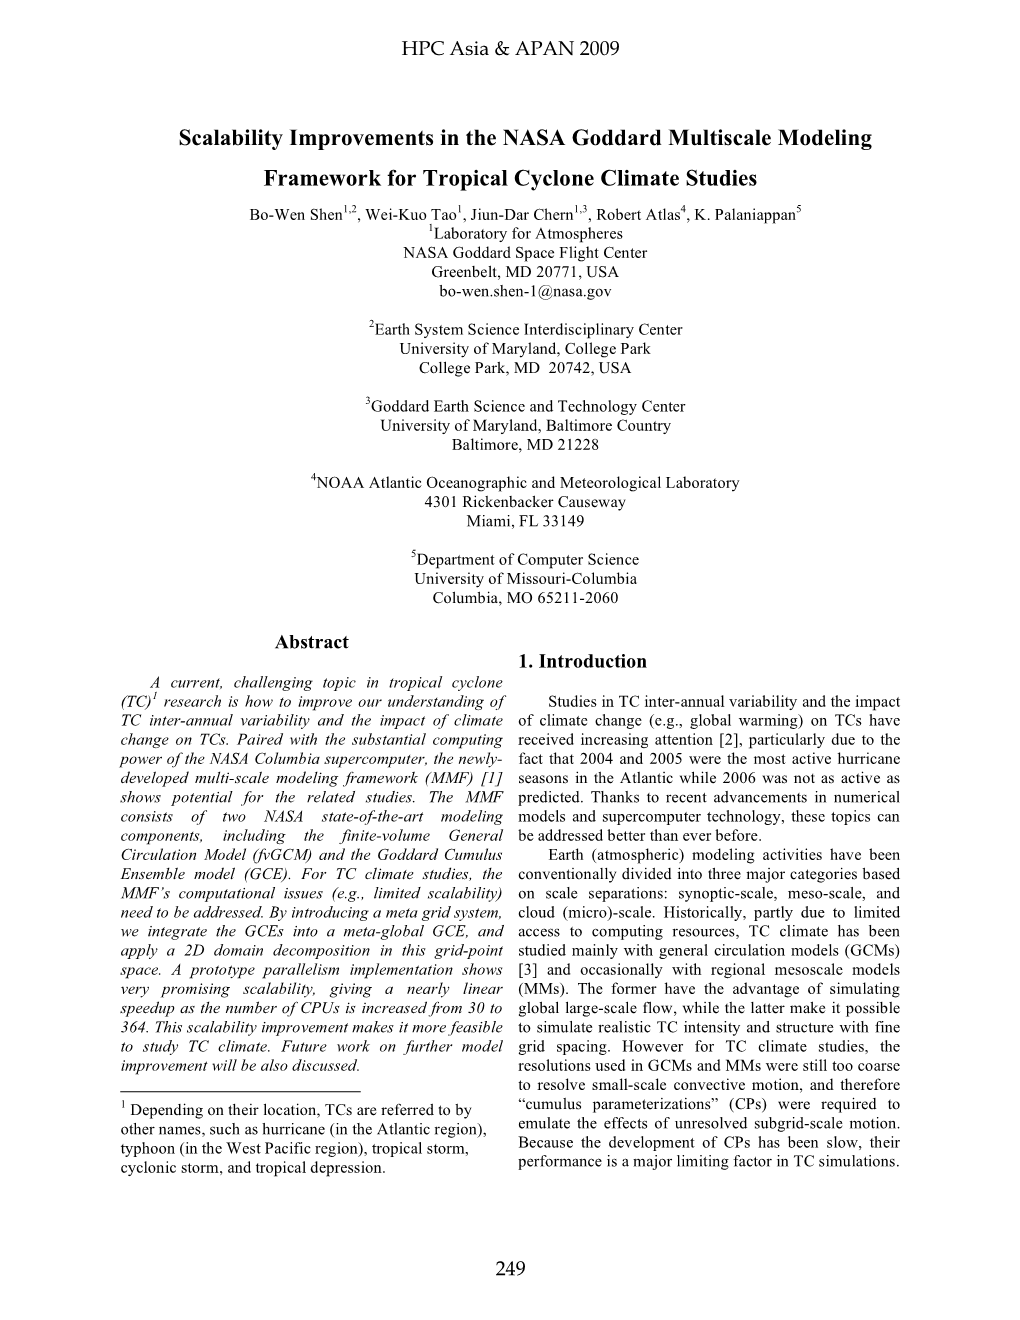 Scalability Improvements in the NASA Goddard Multiscale Modeling Framework for Tropical Cyclone Climate Studies